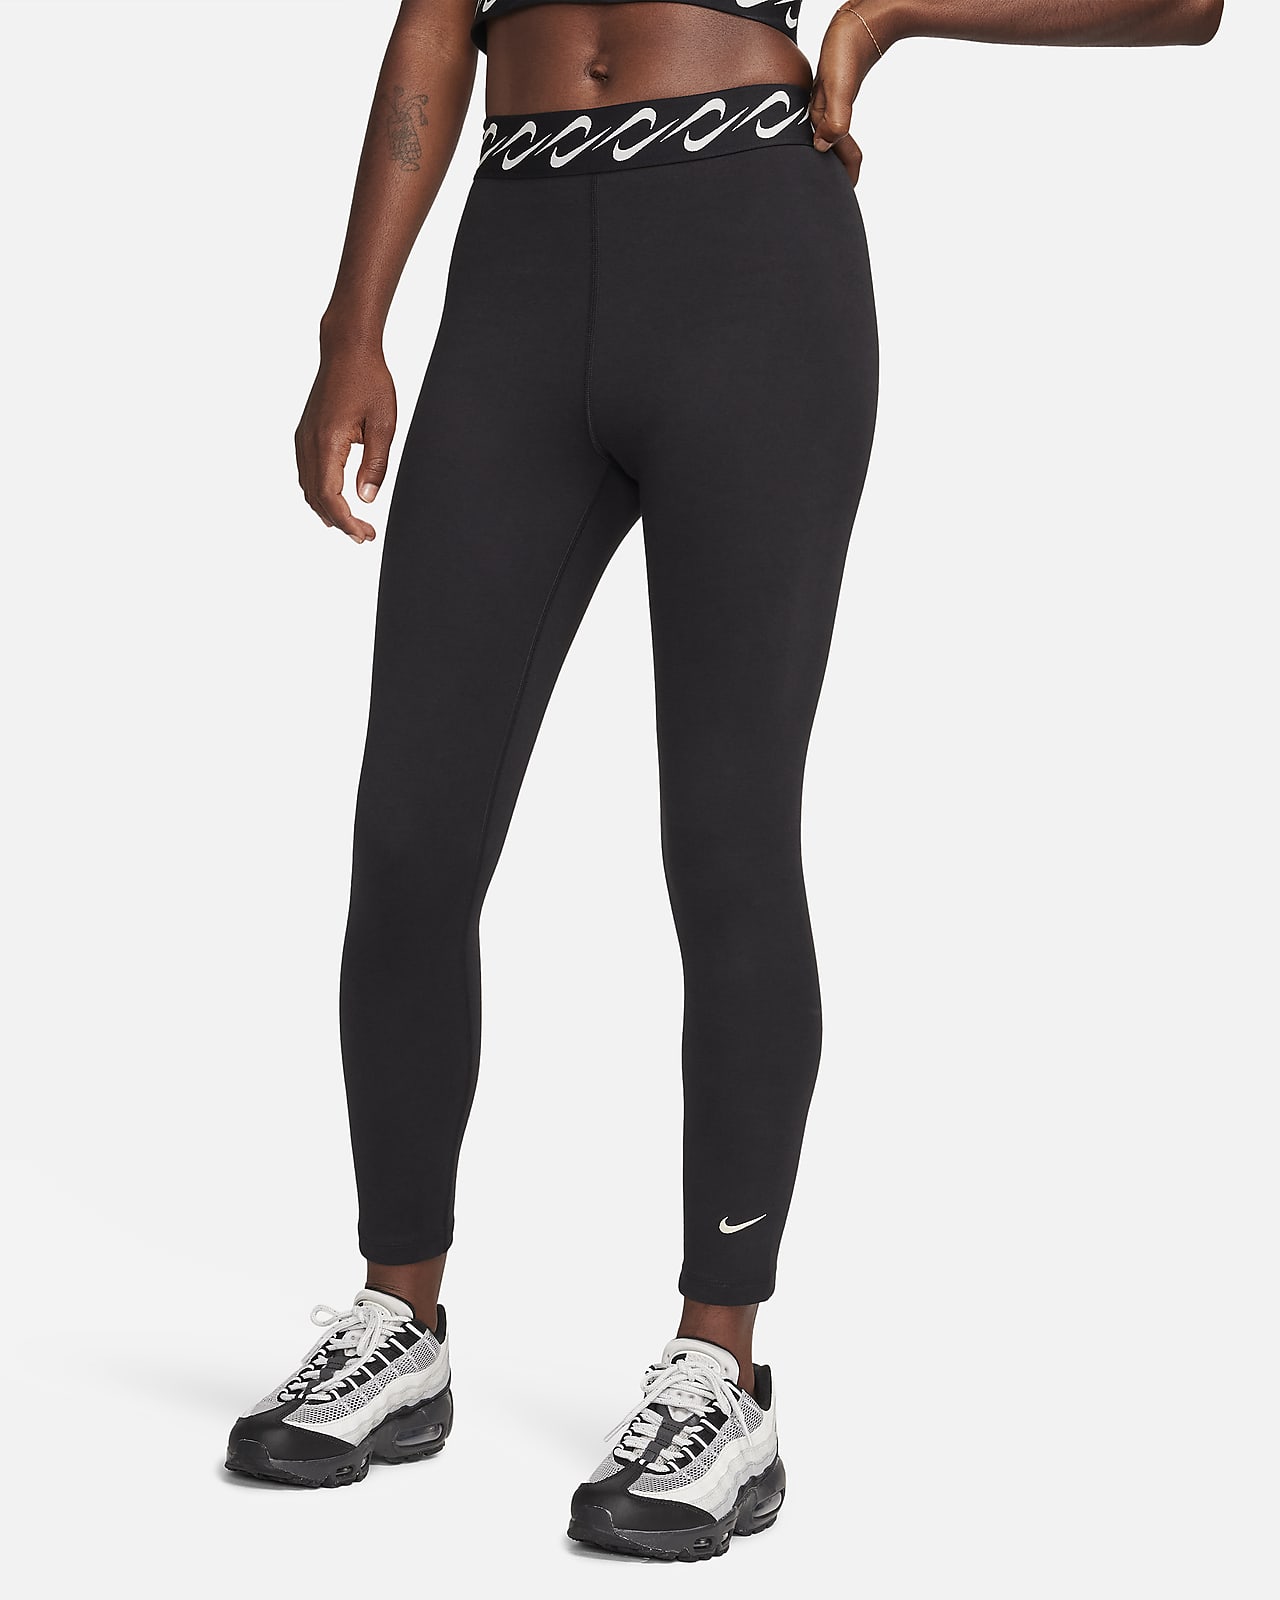 Cotton On Women's Active Core 7/8 Tights